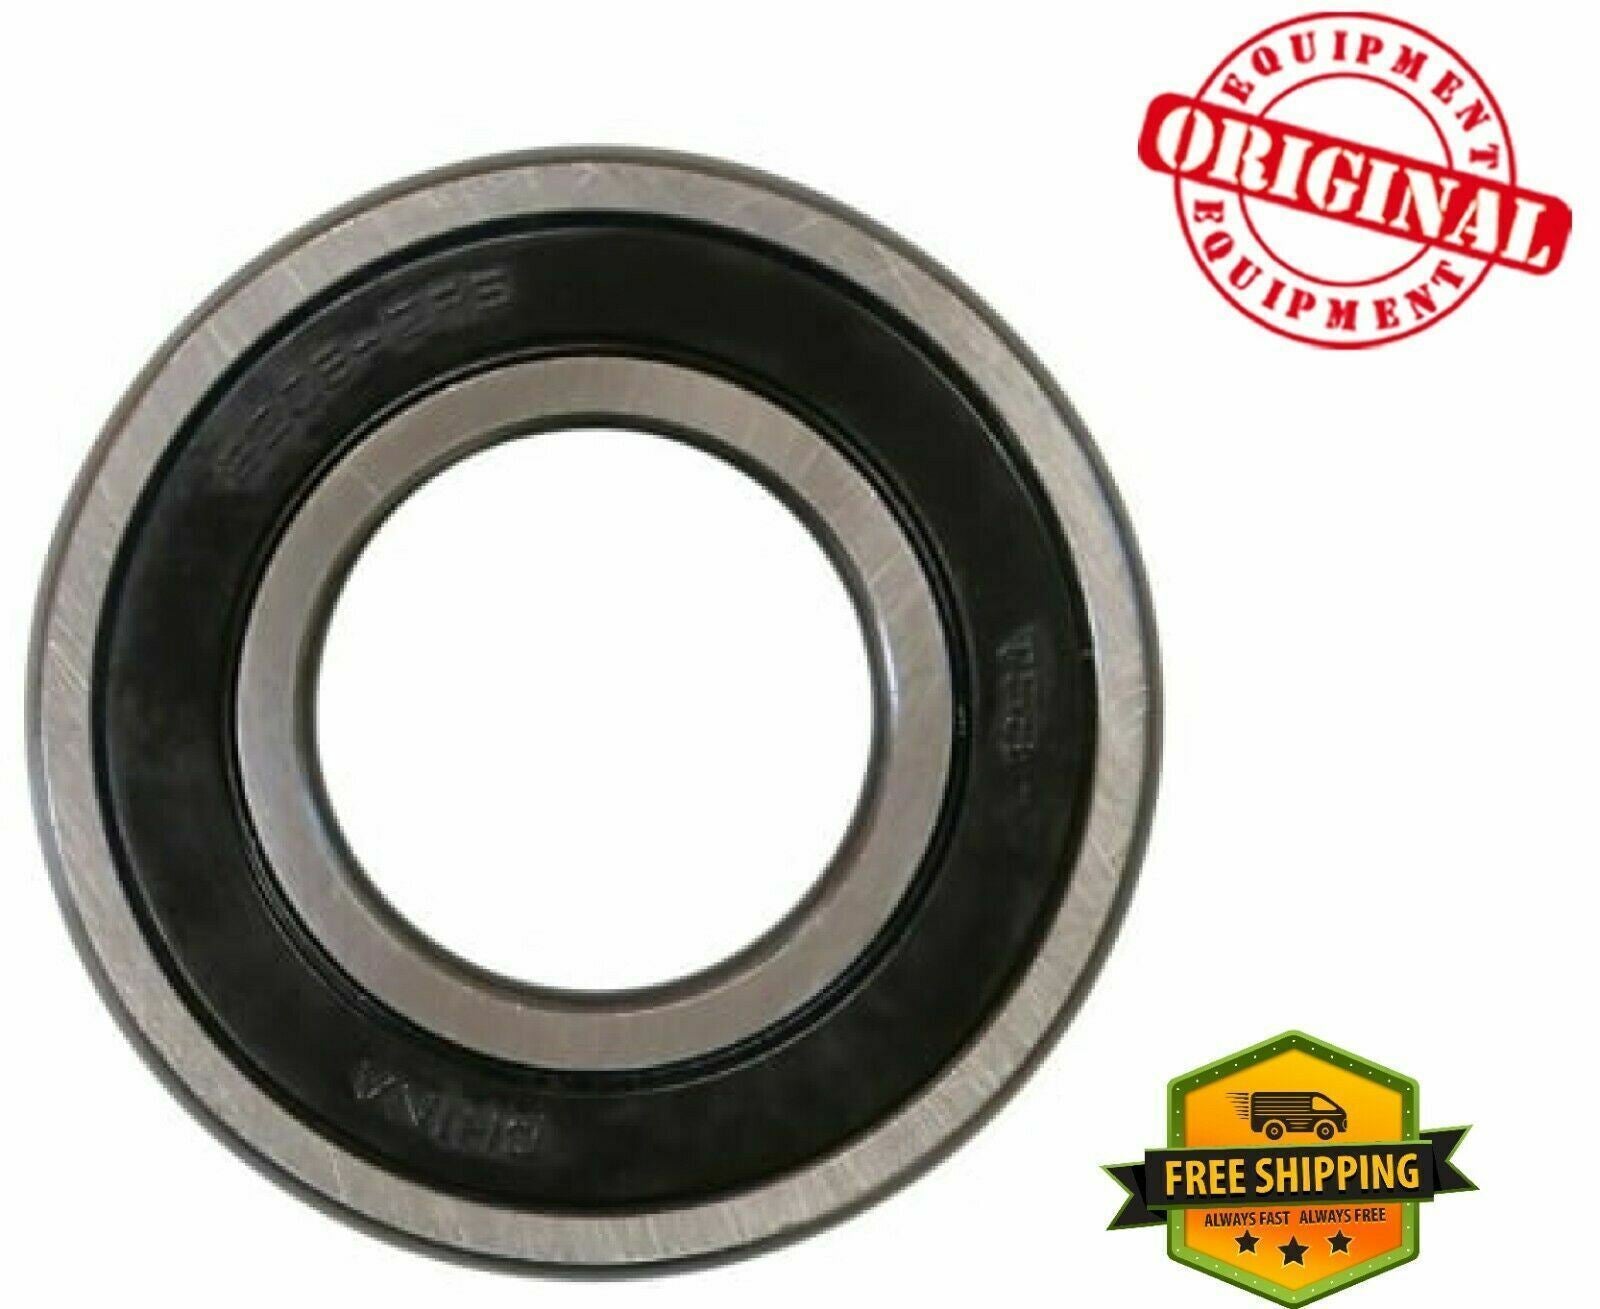 New OEM 22003441 Bearing Rear for Admiral Washer WP22003441 Genuine 2-0720